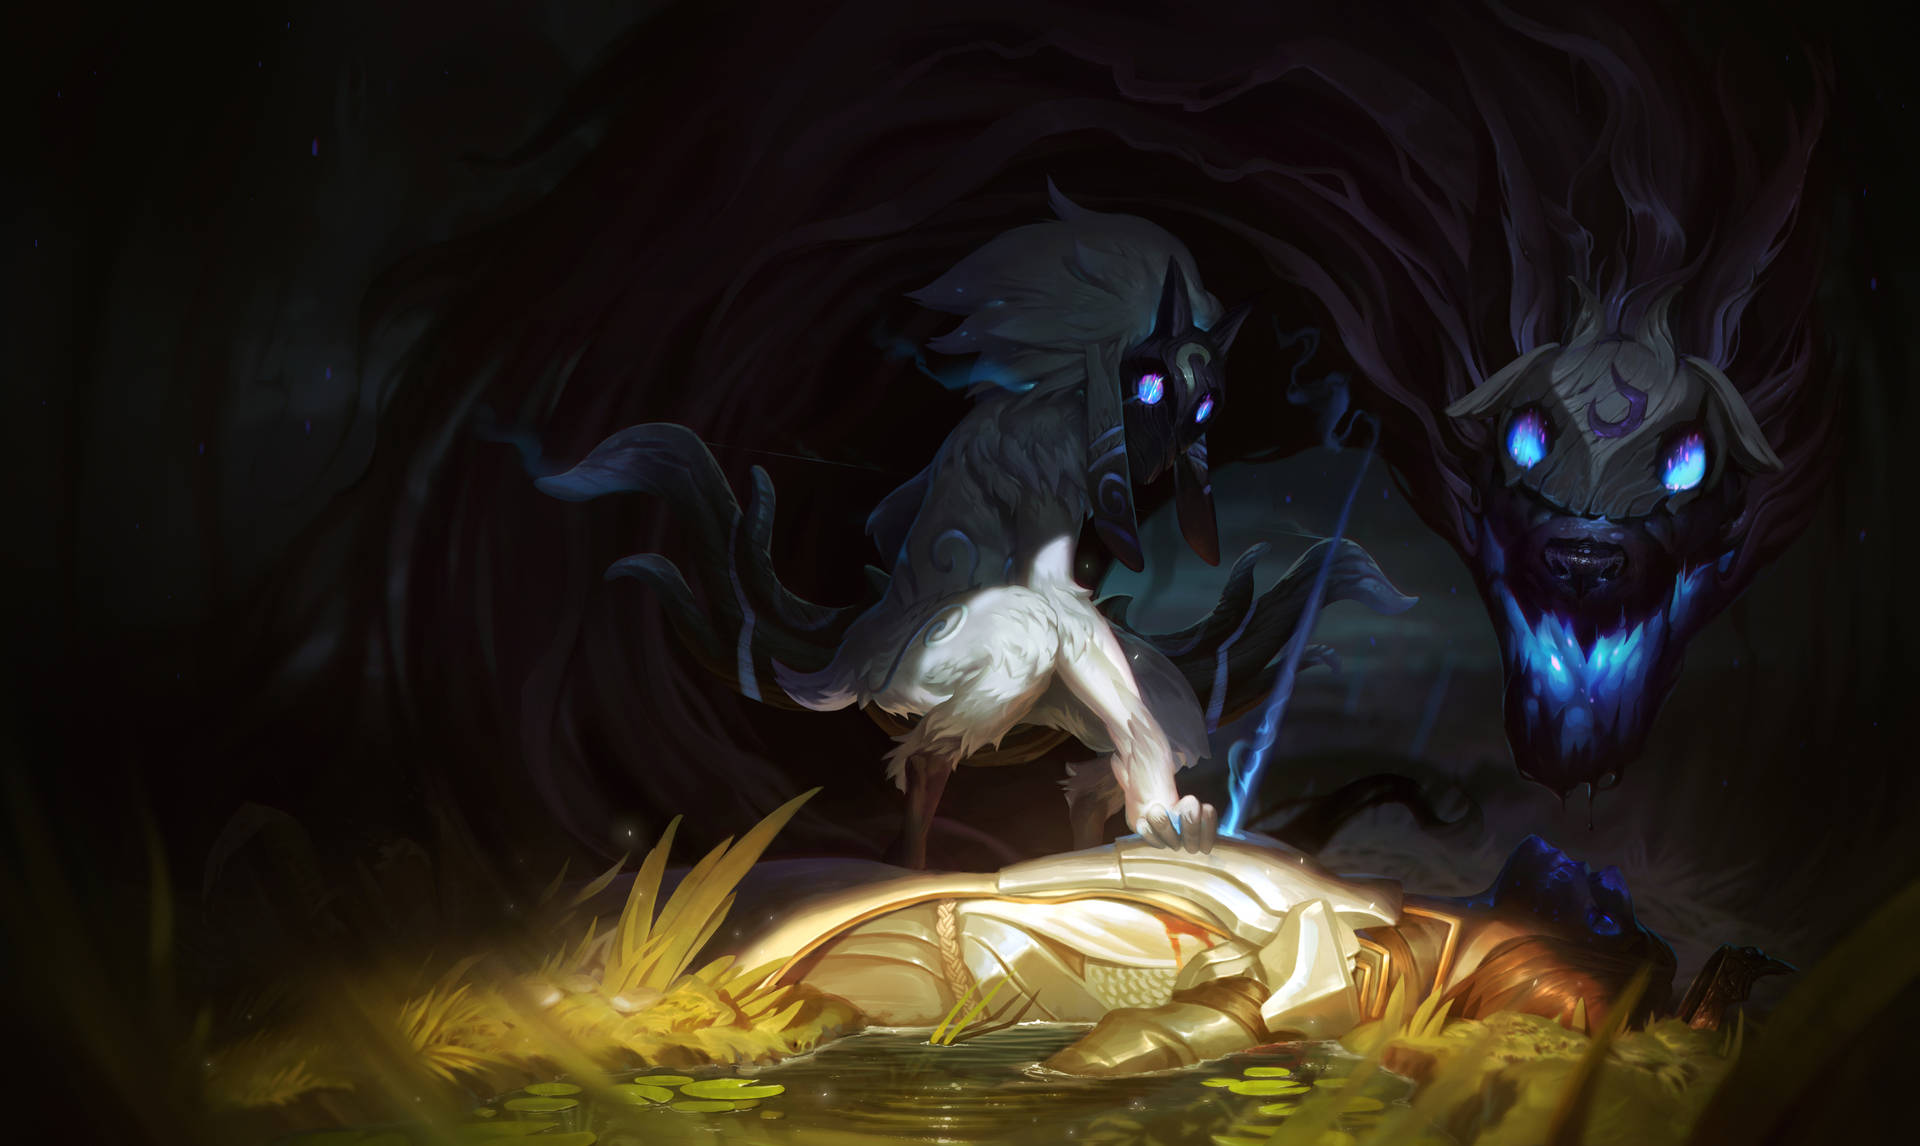 Deadly Kindred, Challenge the Wild Wallpaper